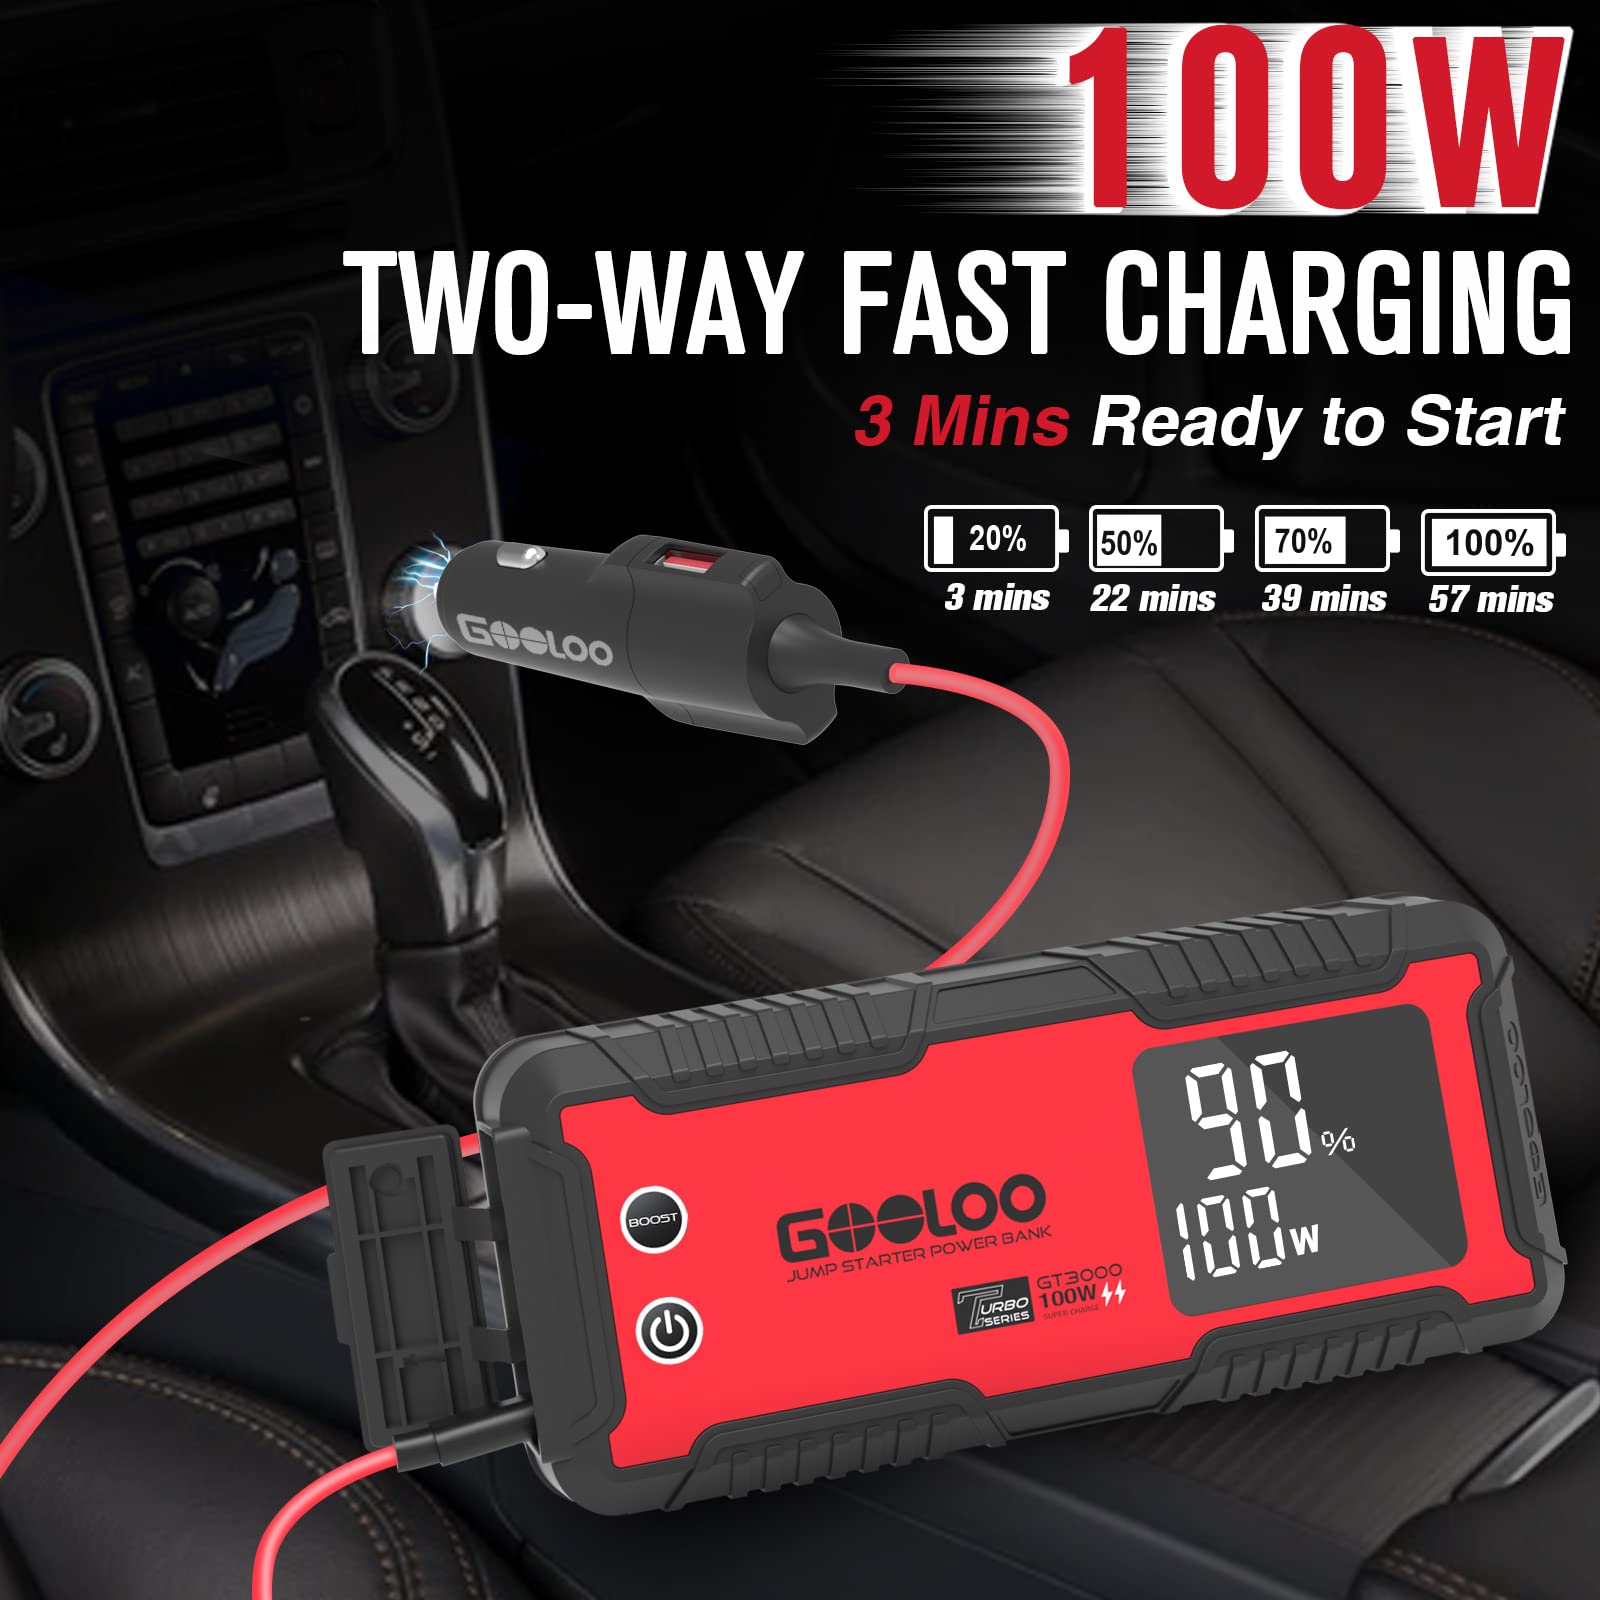 GOOLOO Car Jump Starter,3000A Peak 100W 2-Way Fast Charging Battery Jump Starter for 10.0L Gas and 8.0L Diesel,IP65 12V Jumper Box Power Bank - image 4 of 9